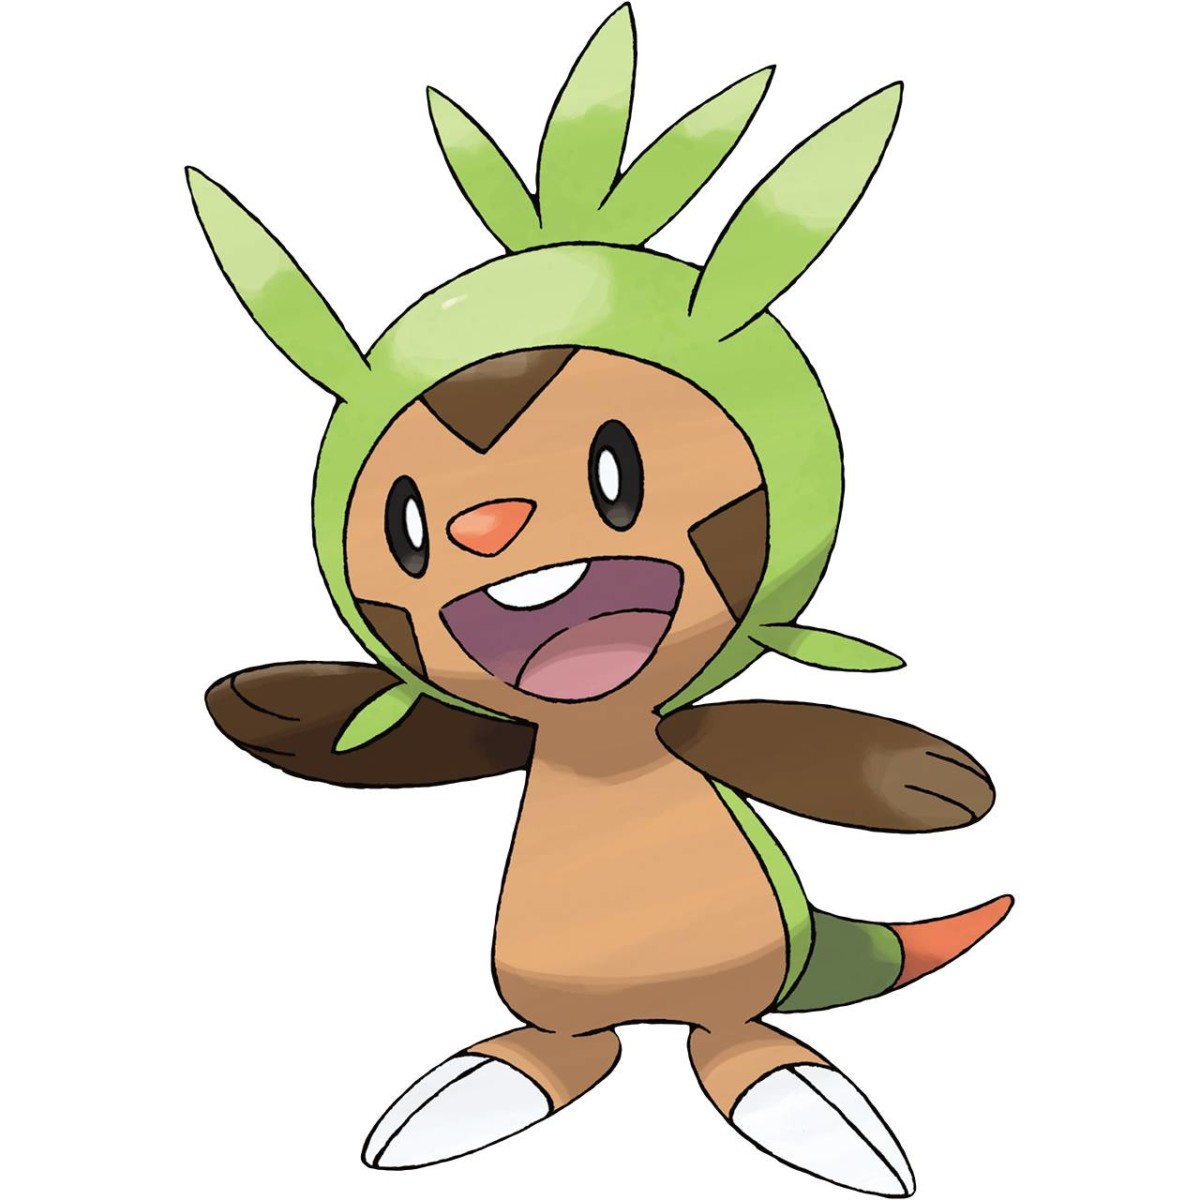 Chespin image